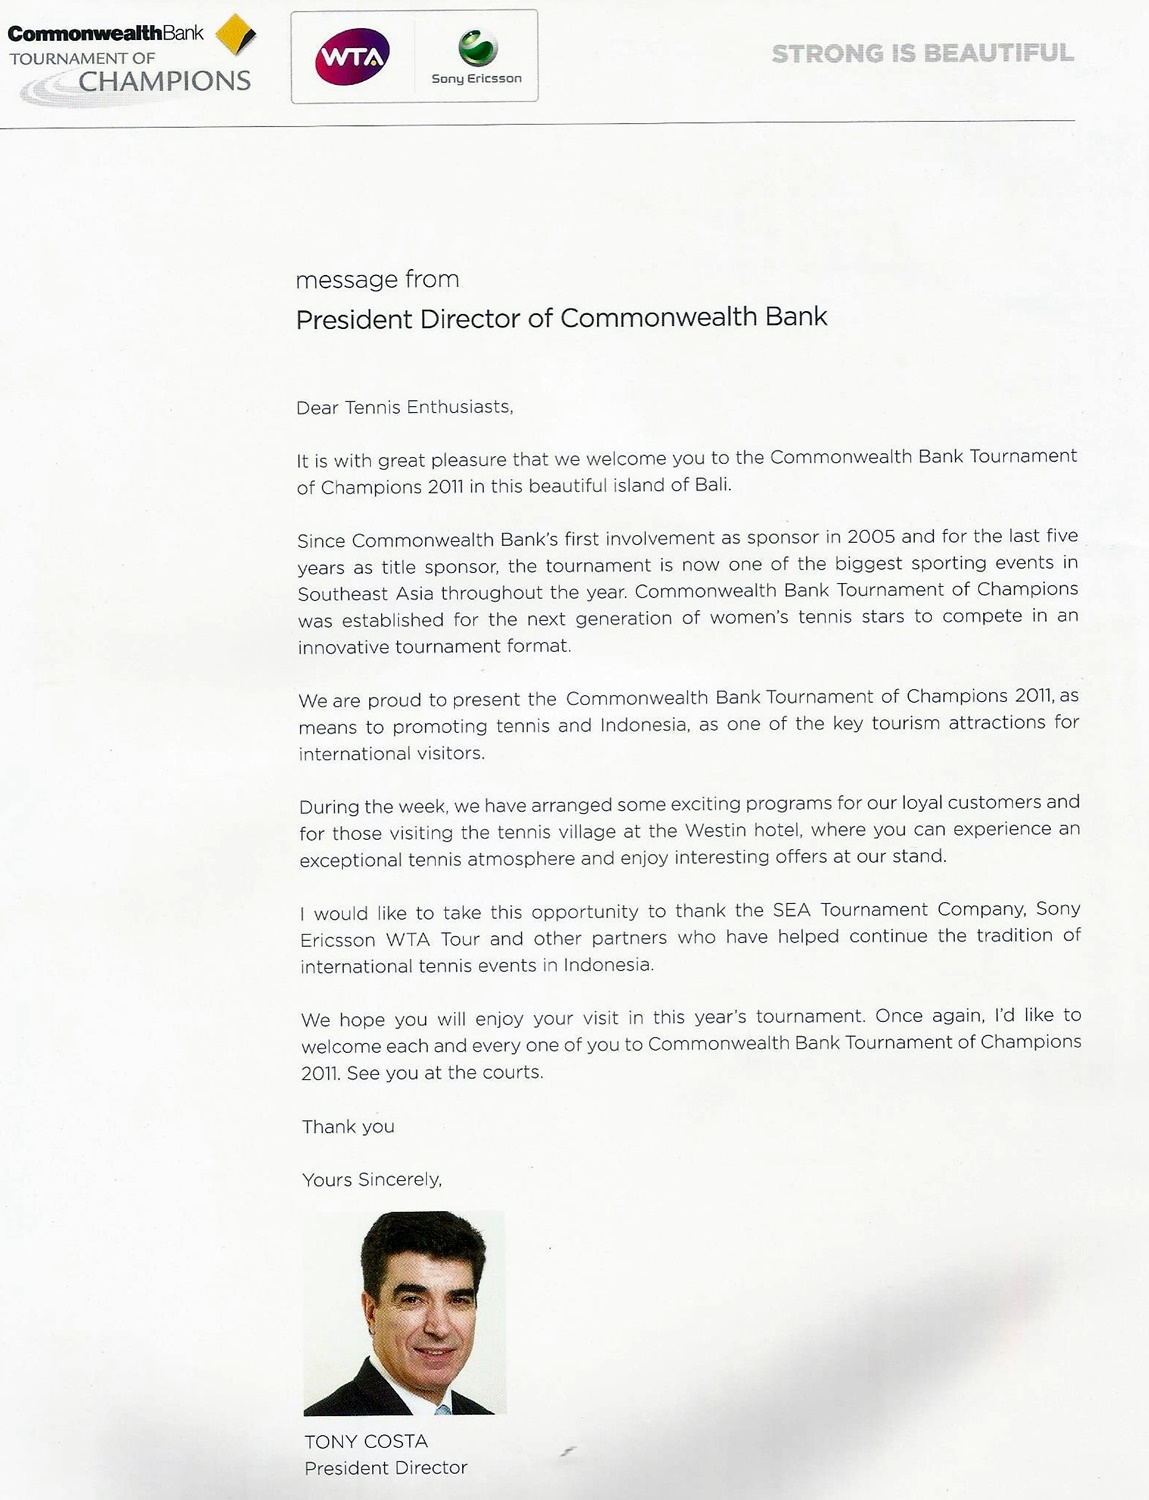 Message from Tony  Costa - President Director of Commonwealth Bank